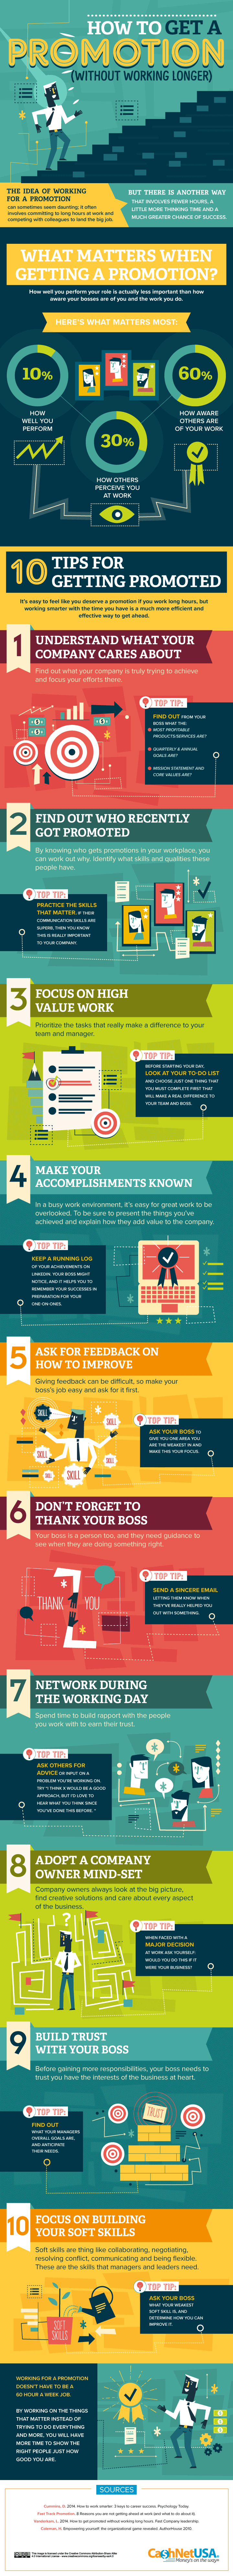 How to Get a Promotion (Without Working Longer) - #infographic